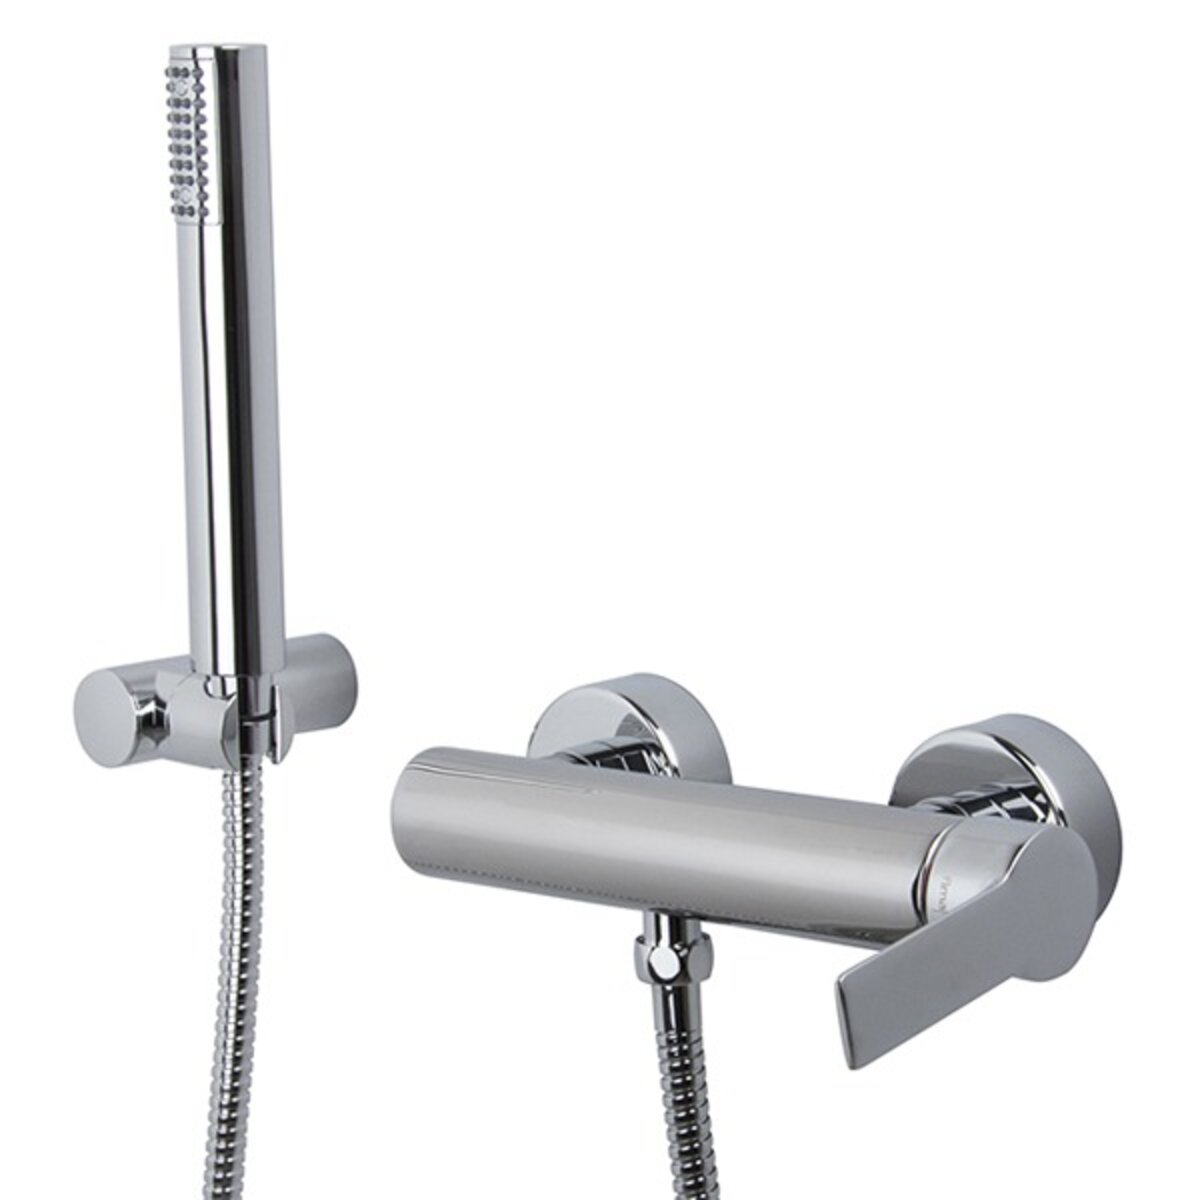 Fima Carlo Frattini Mast external shower mixer without diverter with shower set